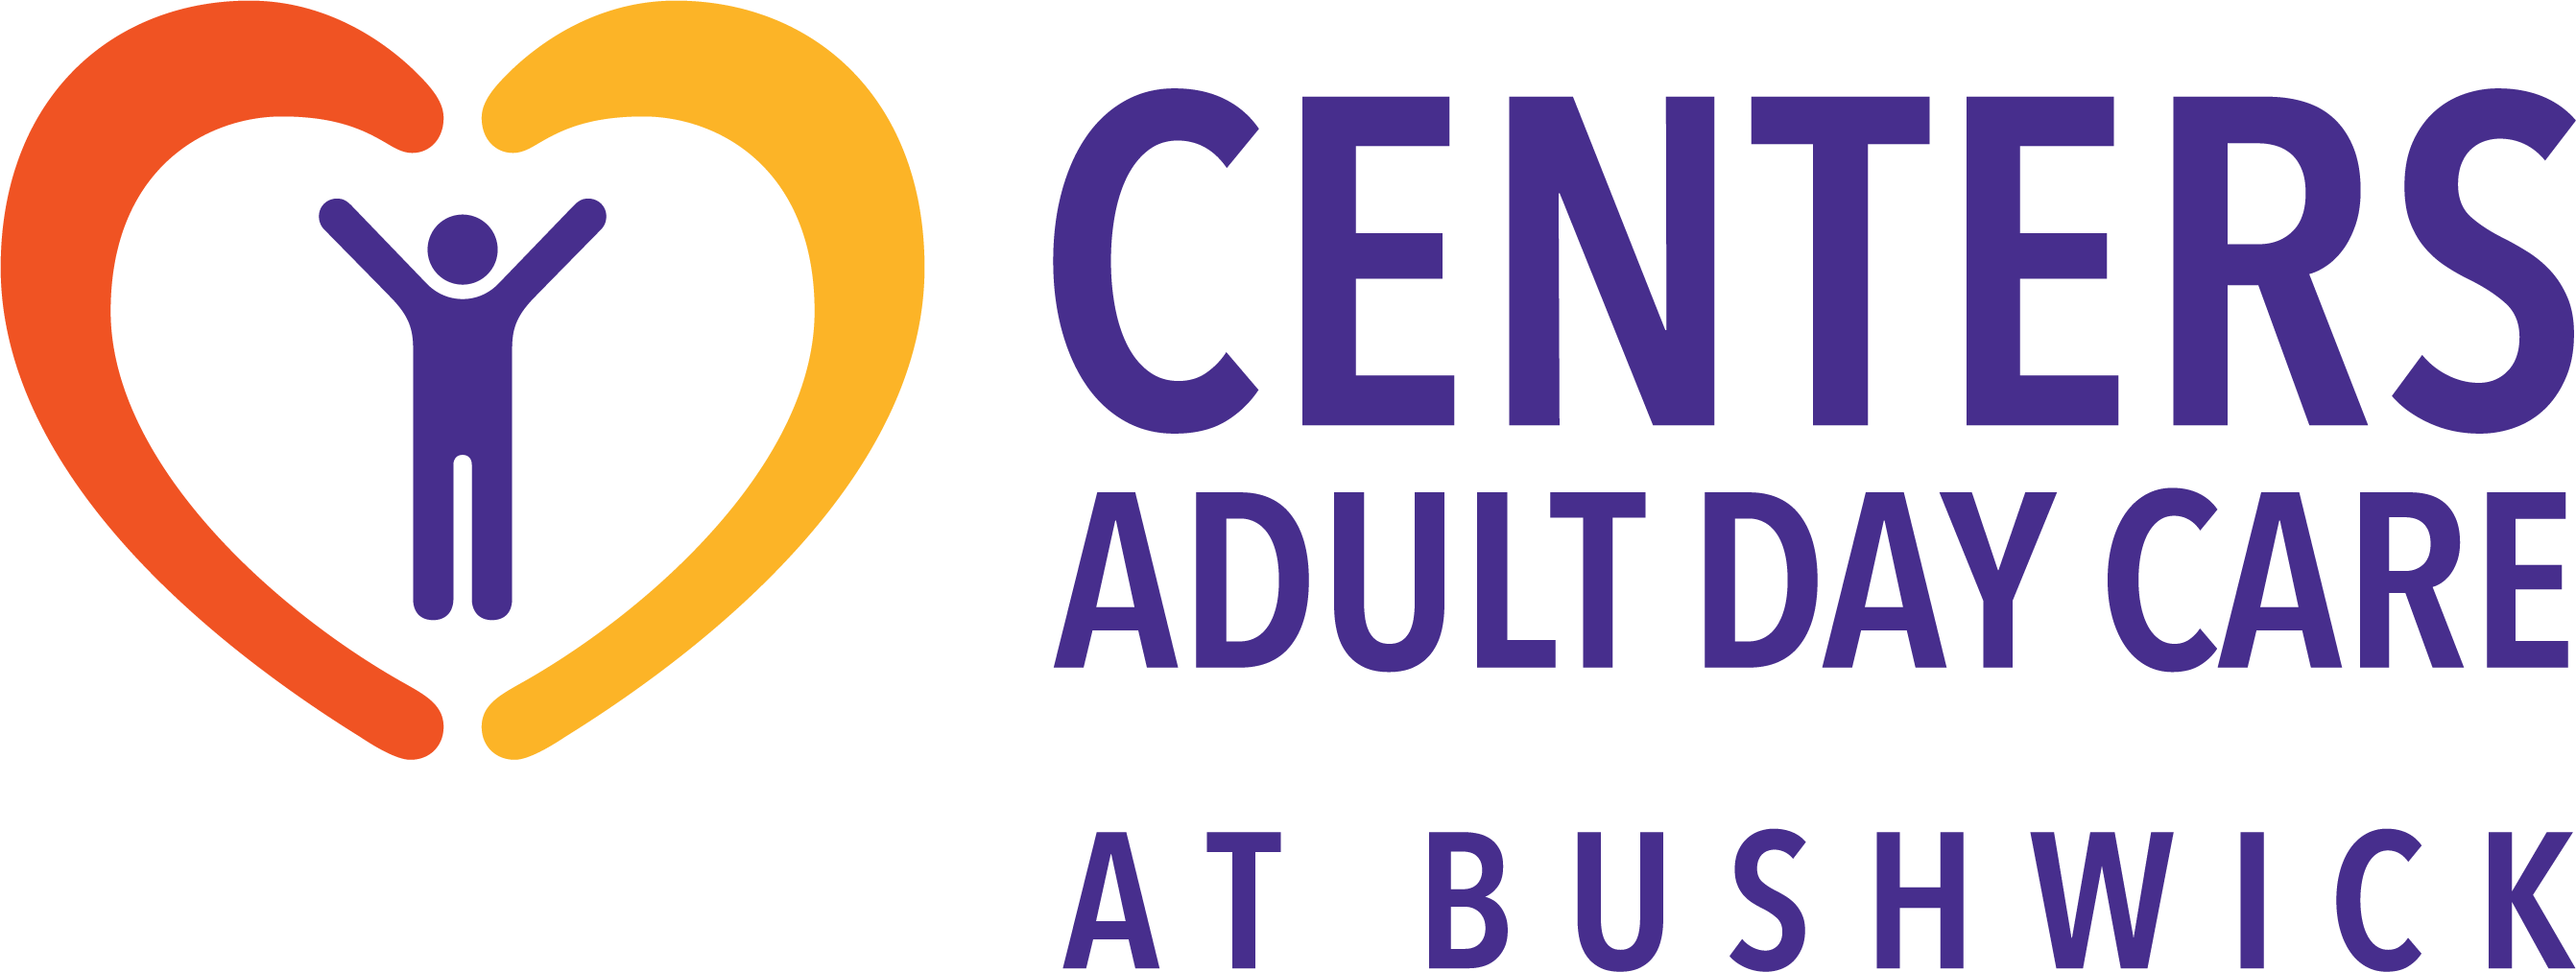 Centers Adult Day Care at Bushwick Center logo